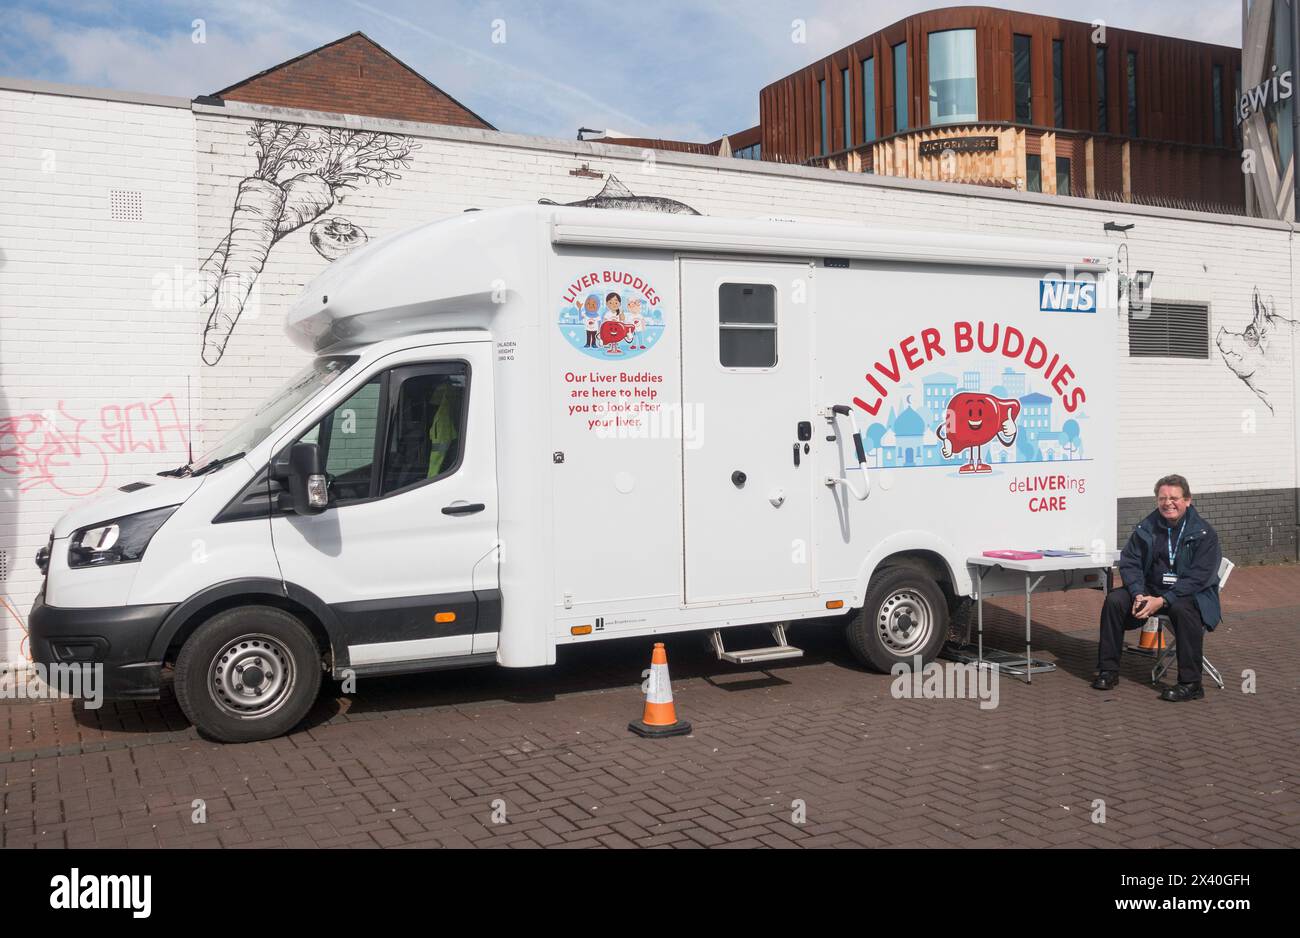 West Yorkshire Mobile Liver Clinic NHS Liver Buddies Vehicle a Leeds, Yorkshire, Inghilterra, Regno Unito Foto Stock